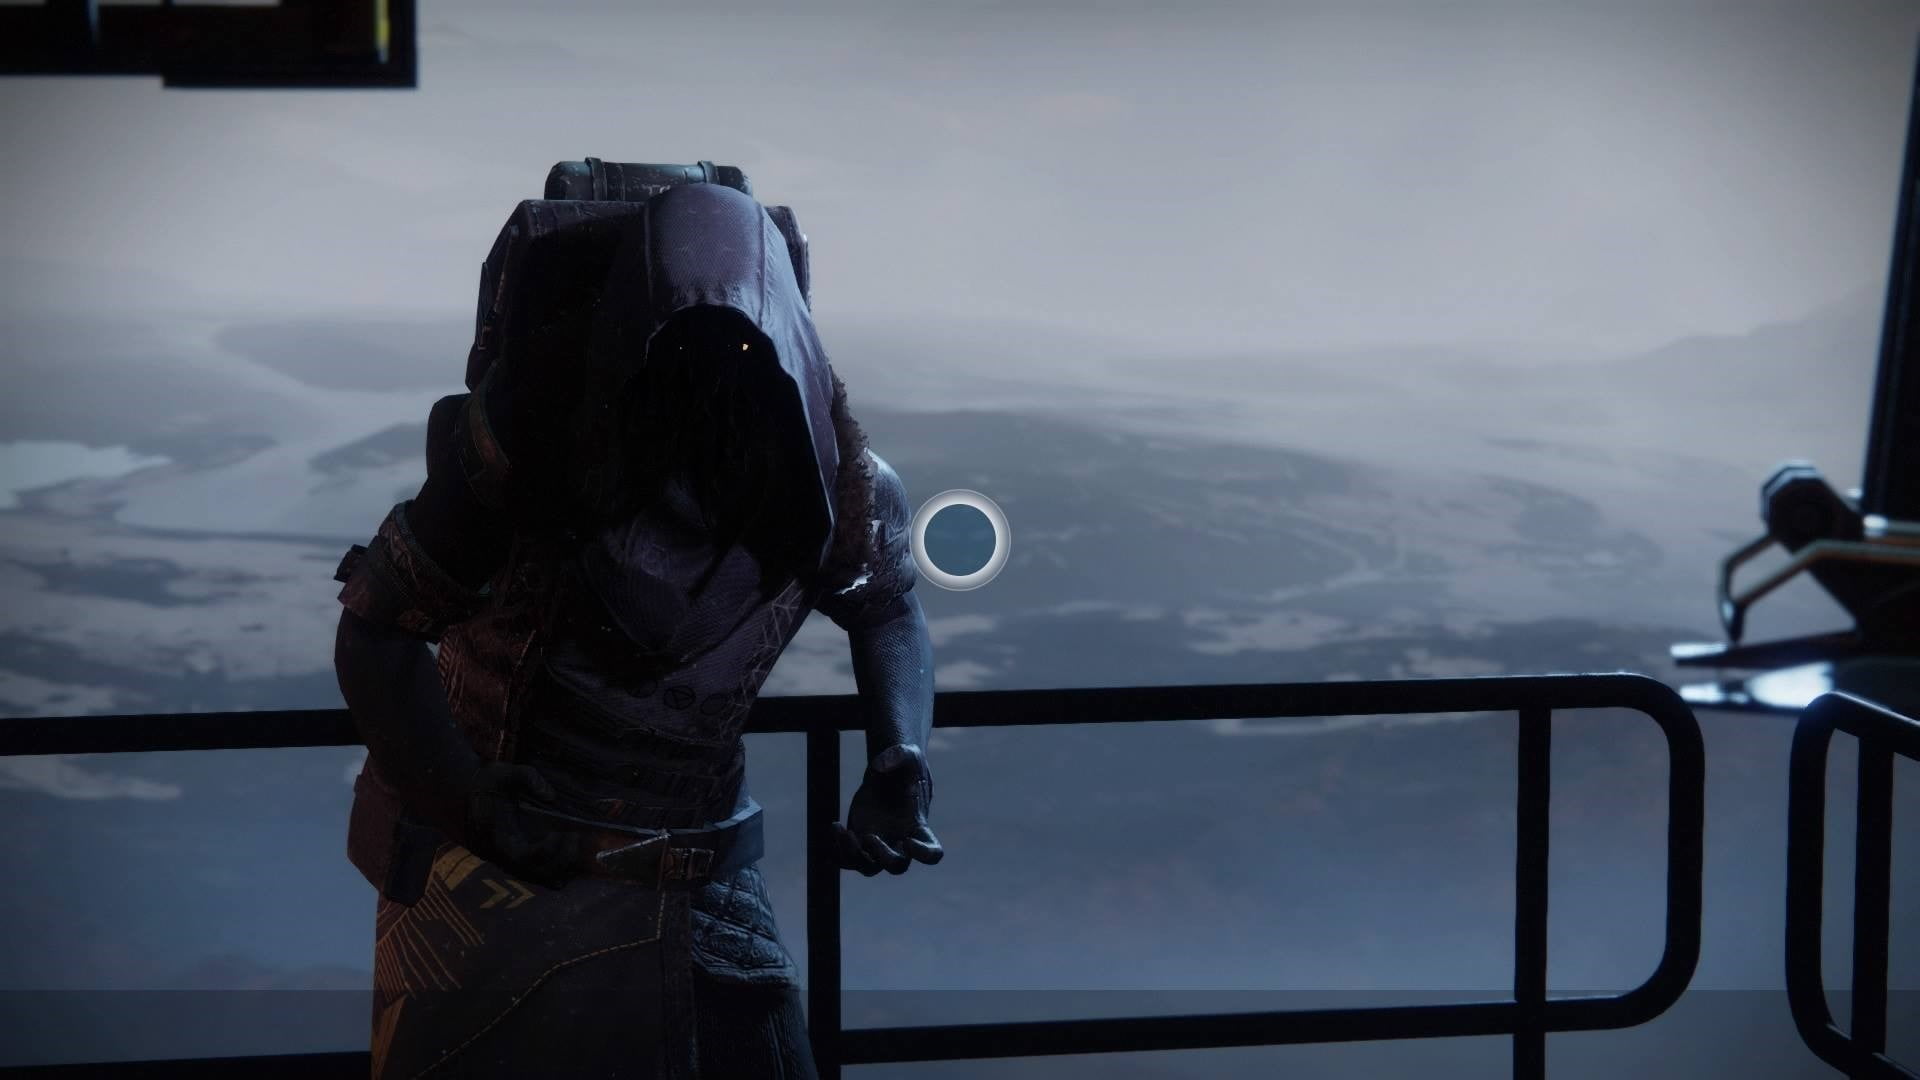 Destiny 2 Xur Inventory – Hard Light, Actium War Rig, Eye of Another World, and More